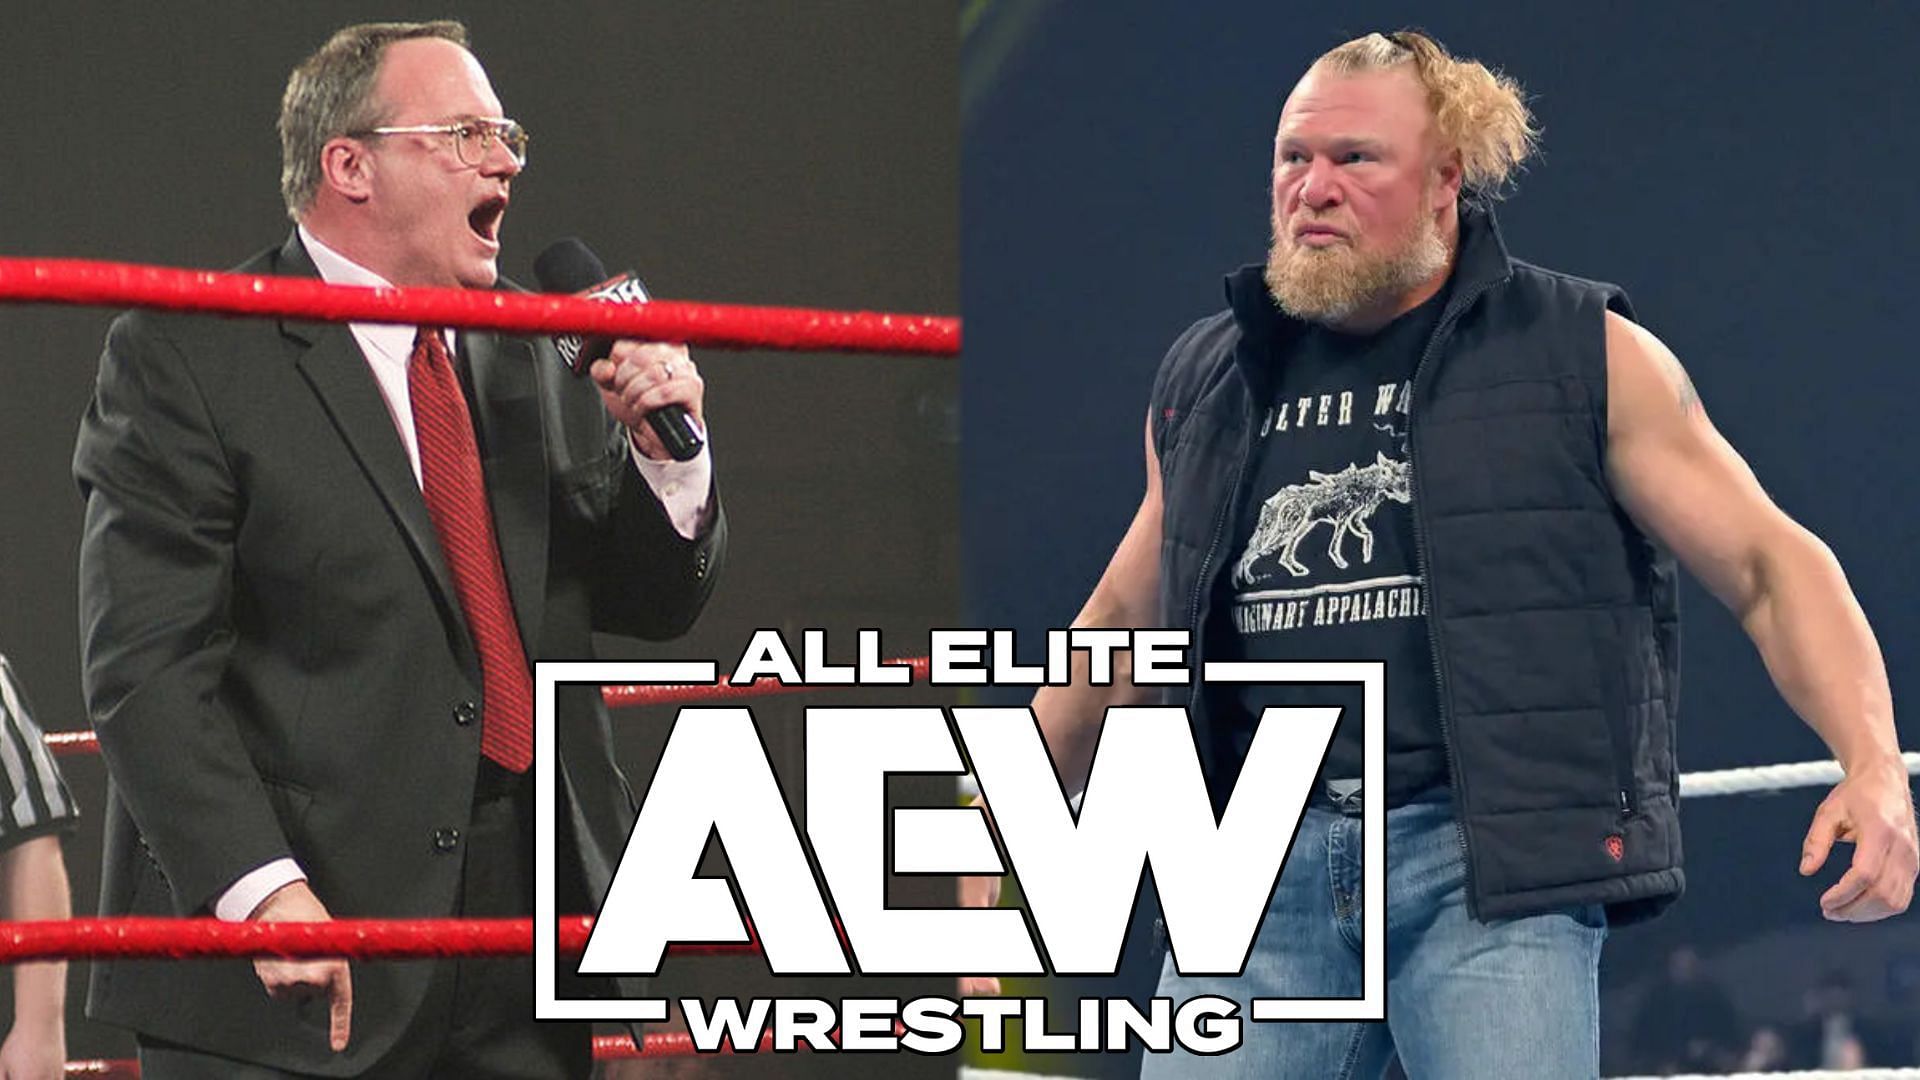 Is this AEW star trying to emulate Brock Lesnar?